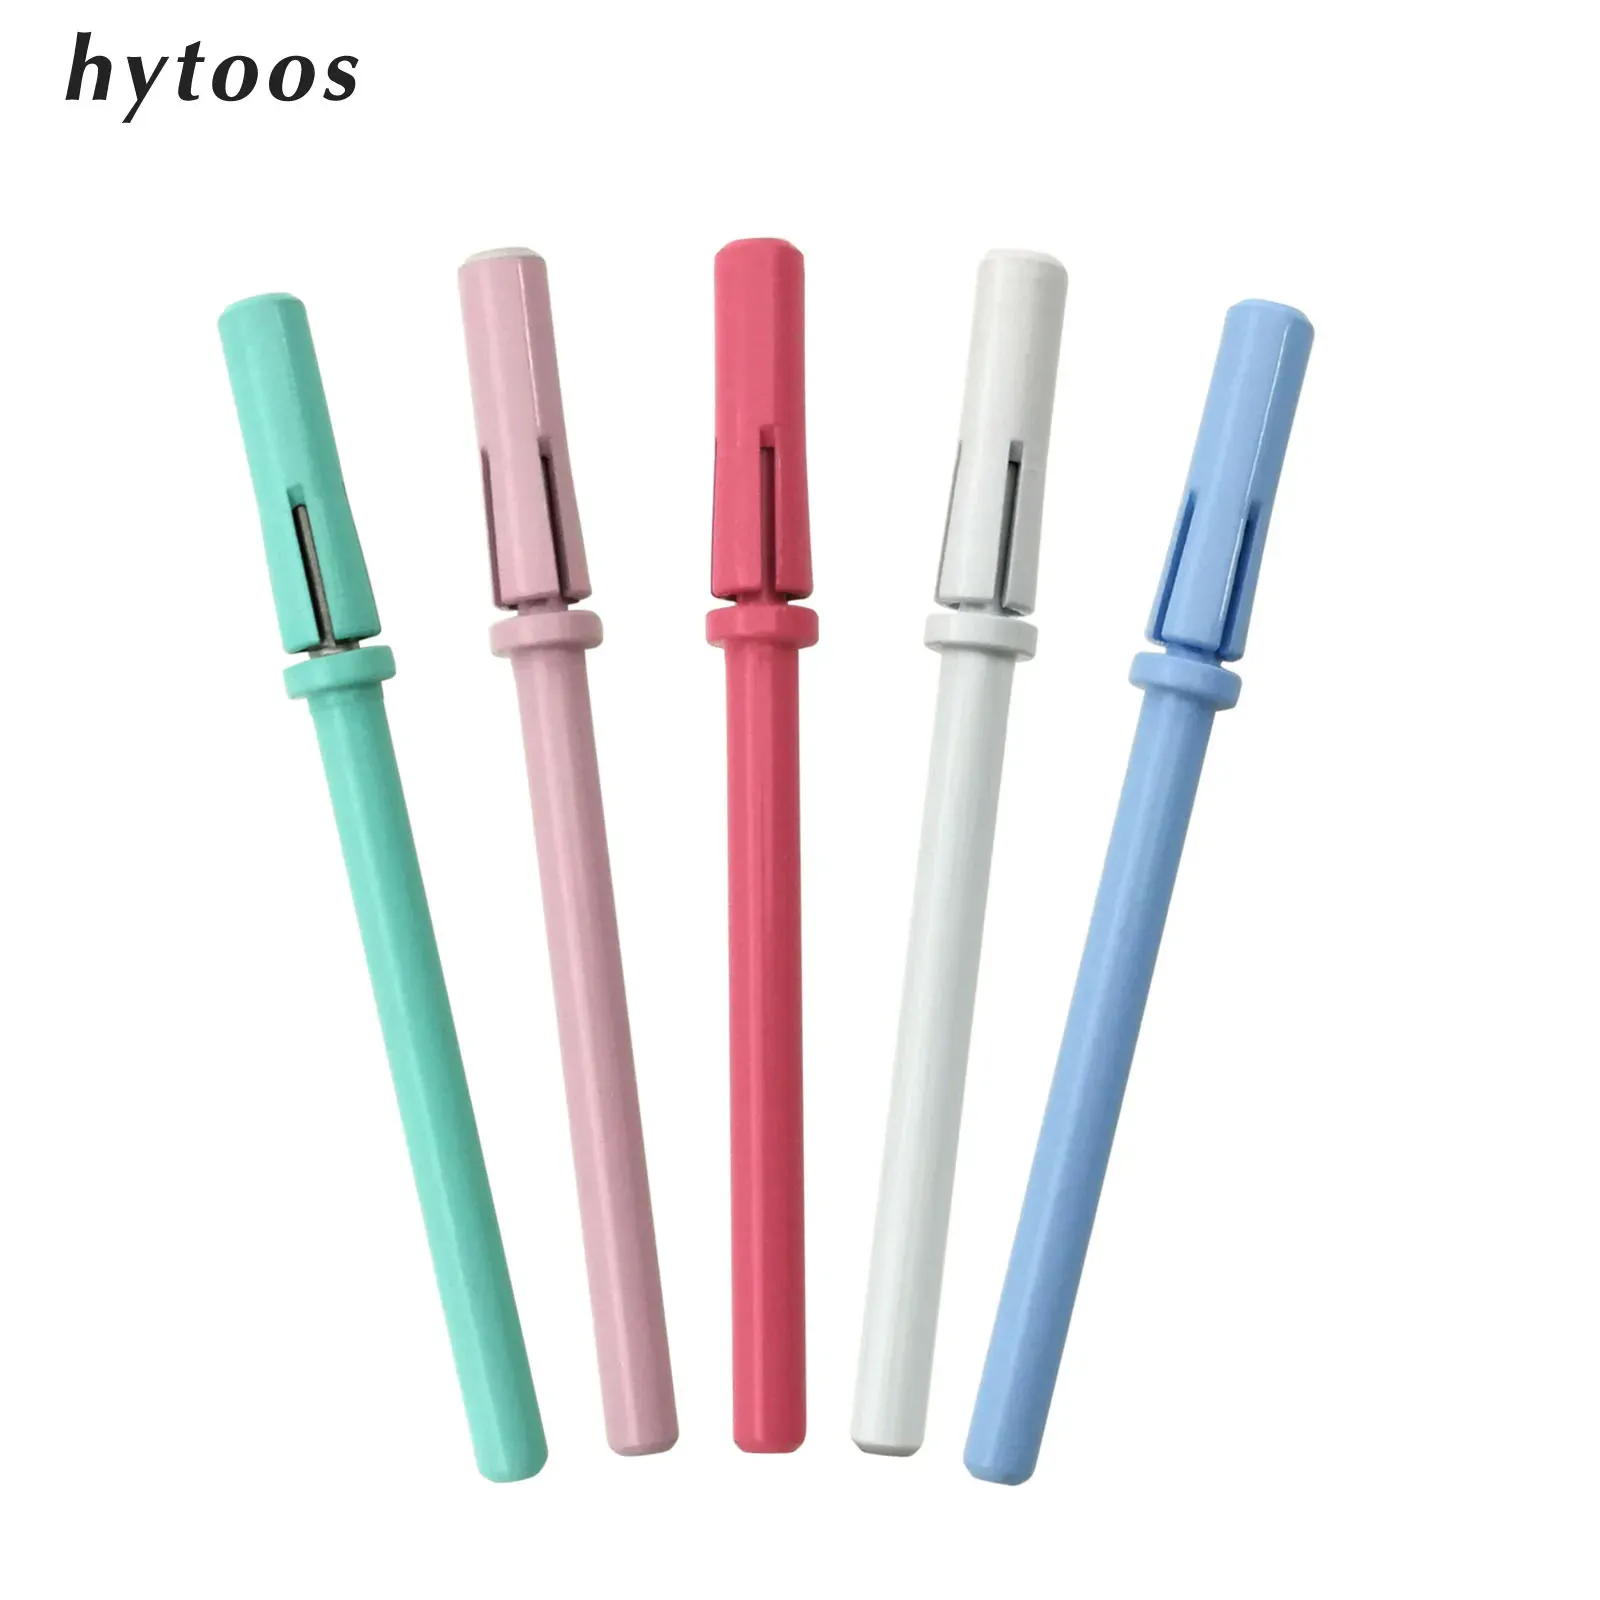 Bits HYTOOS Candy Color 3.1mm Mandrel Bit For Mini Sanding Bands Stainless Steel 3/32 Nail Drill Bit Accessories Tool